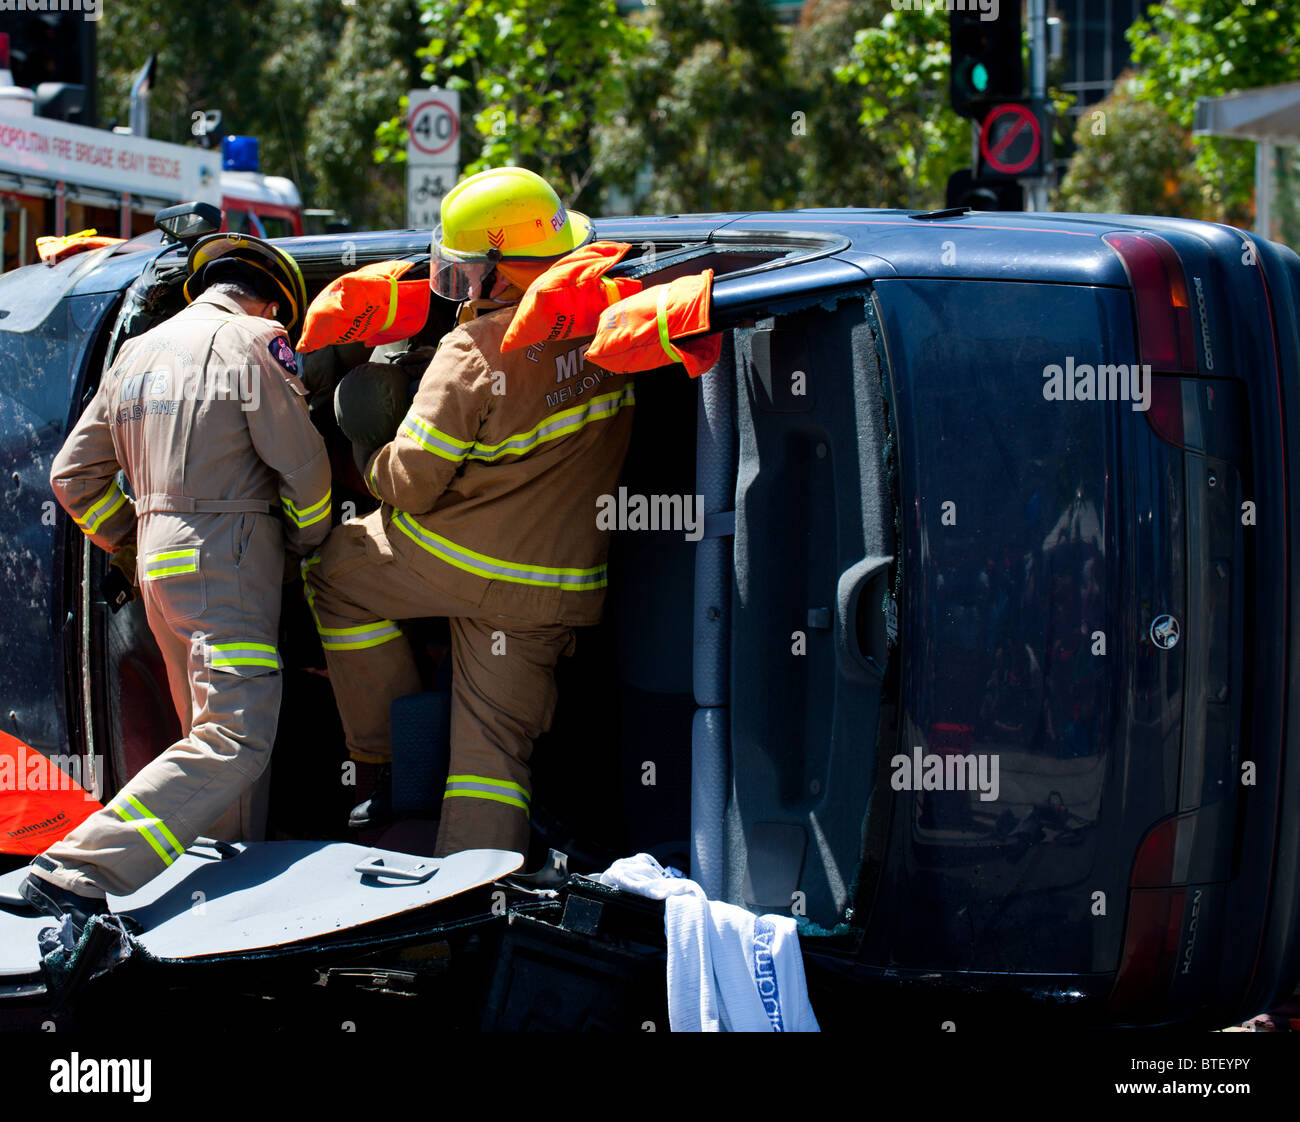 Emergency rescue workers cut a person out of a crashed vehicle. Stock Photo